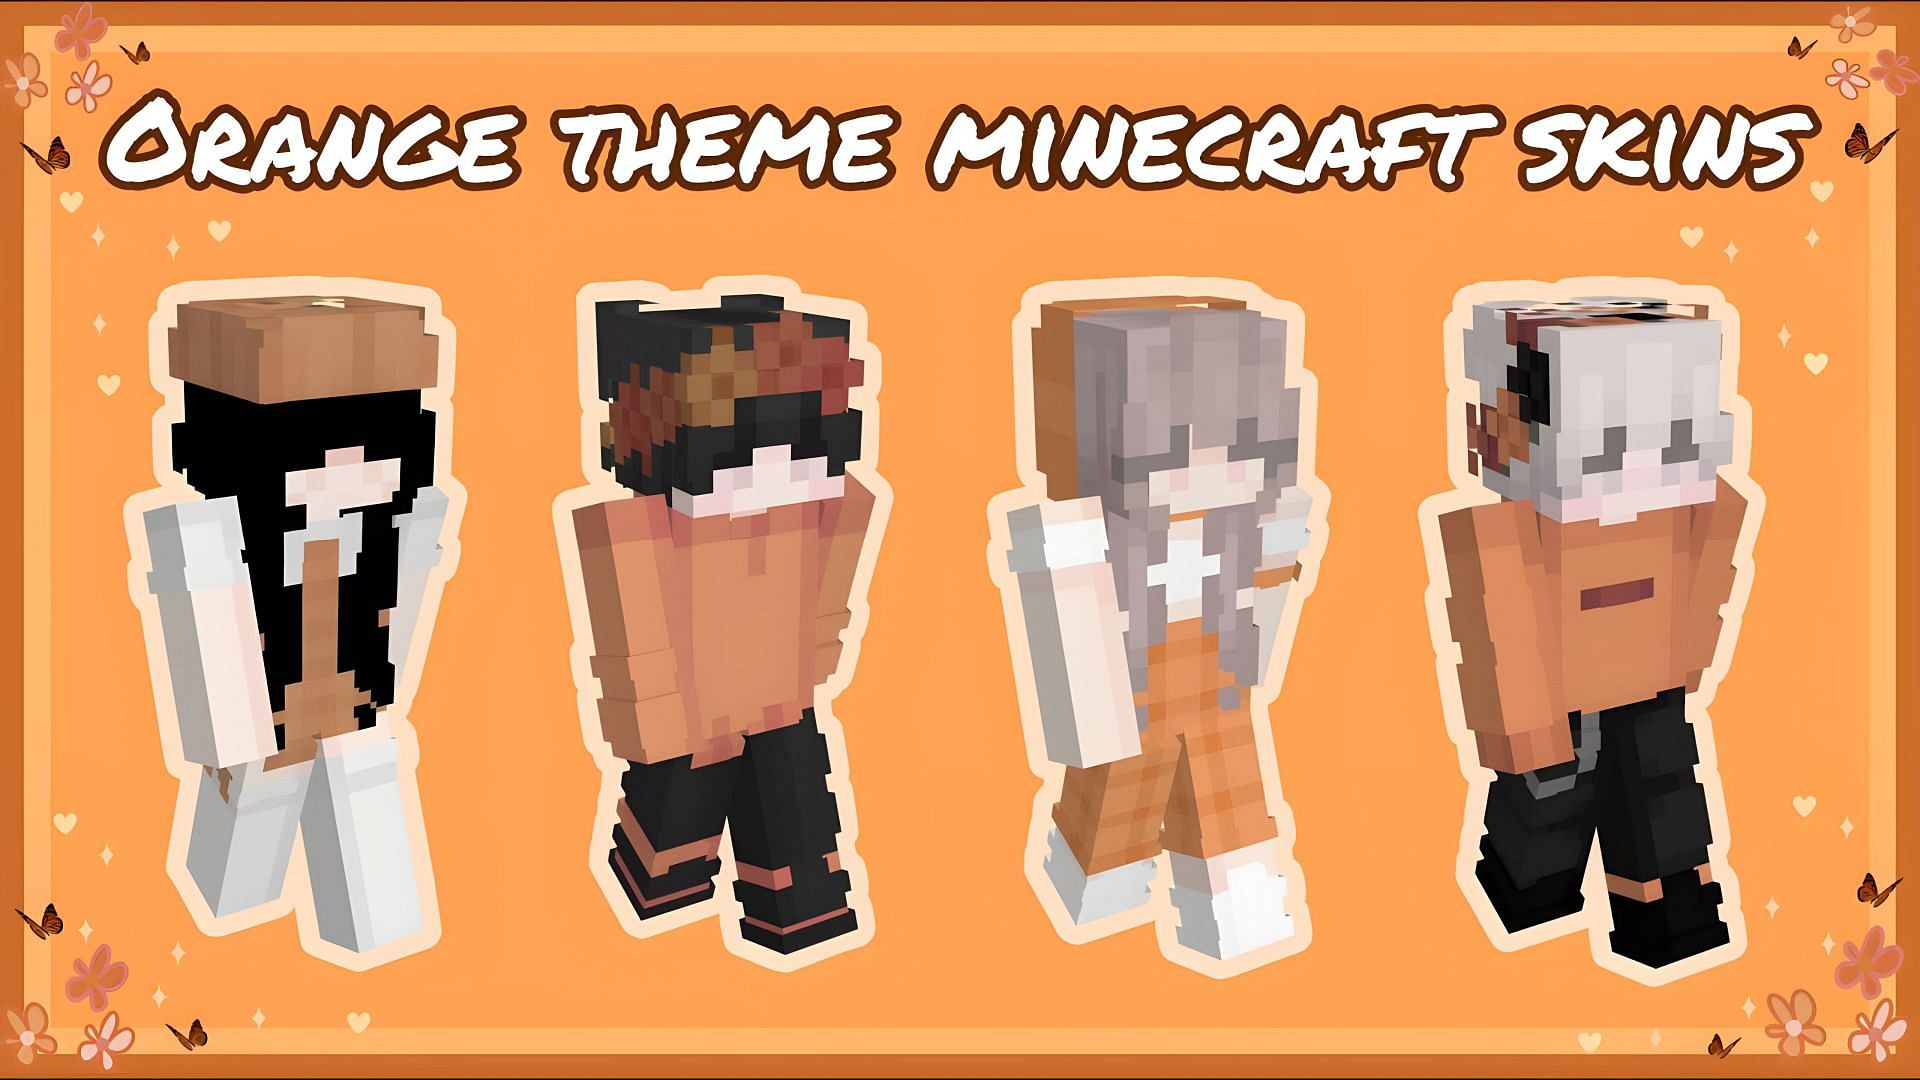 Cute Girly Minecraft Skins Wallpapers